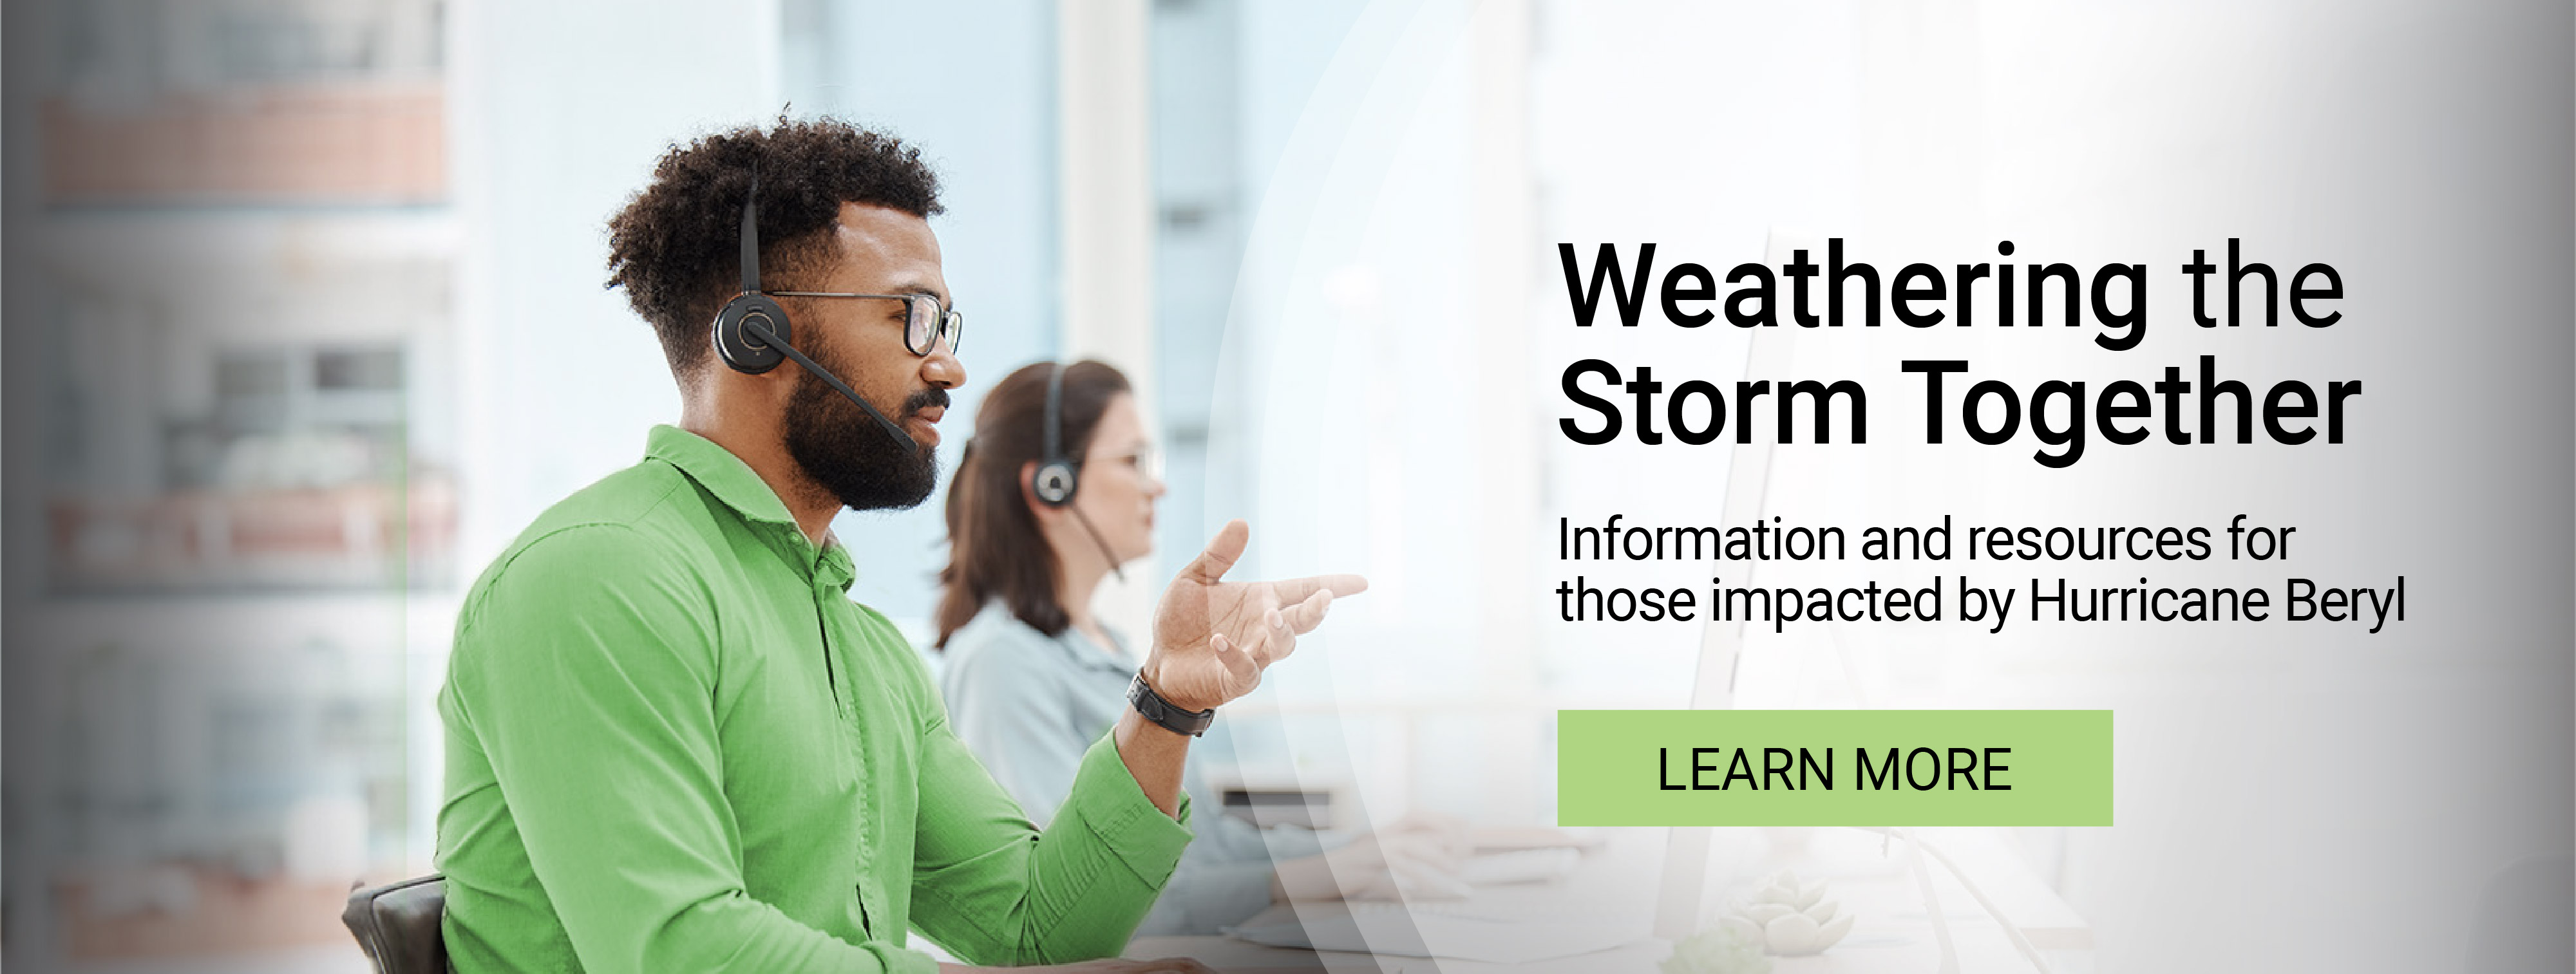 Weathering the Storm Together. Information and resources for those impacted by Hurricane Beryl. Click here to learn more.